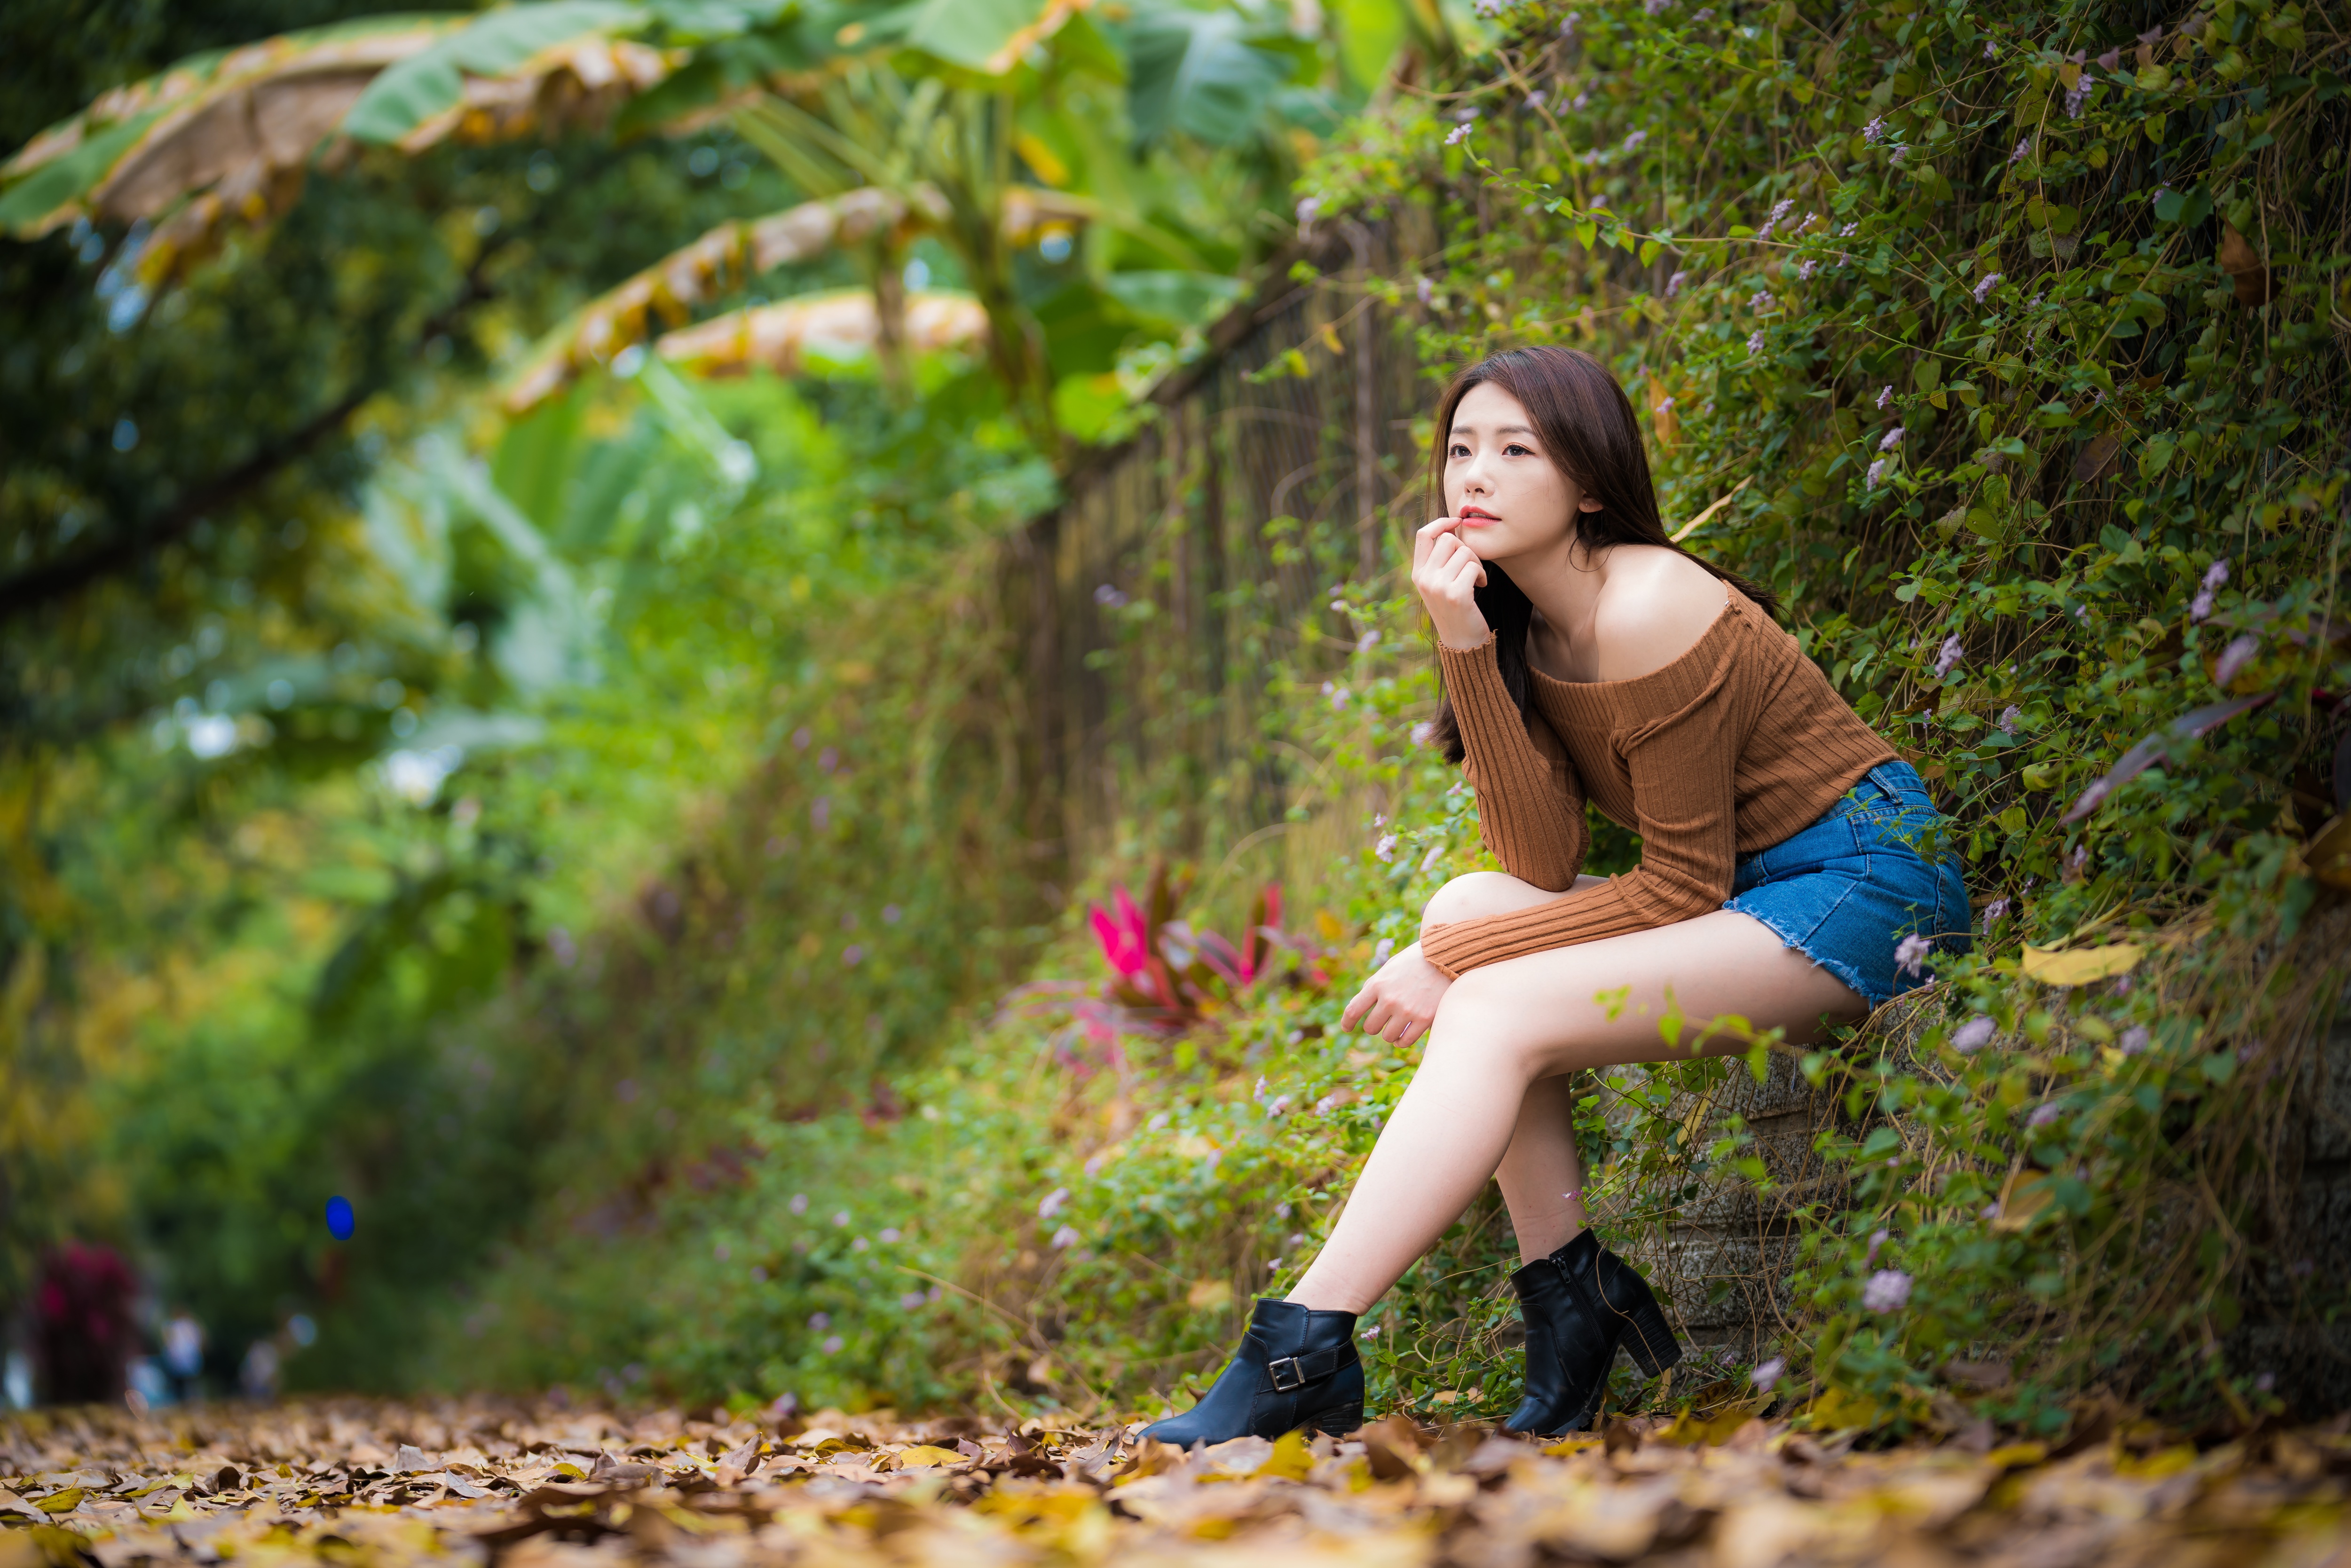 Asian Model Women Long Hair Brunette Leaves Sitting Cardigan Bushes Flowers Shoes Looking Into The D 5000x3335